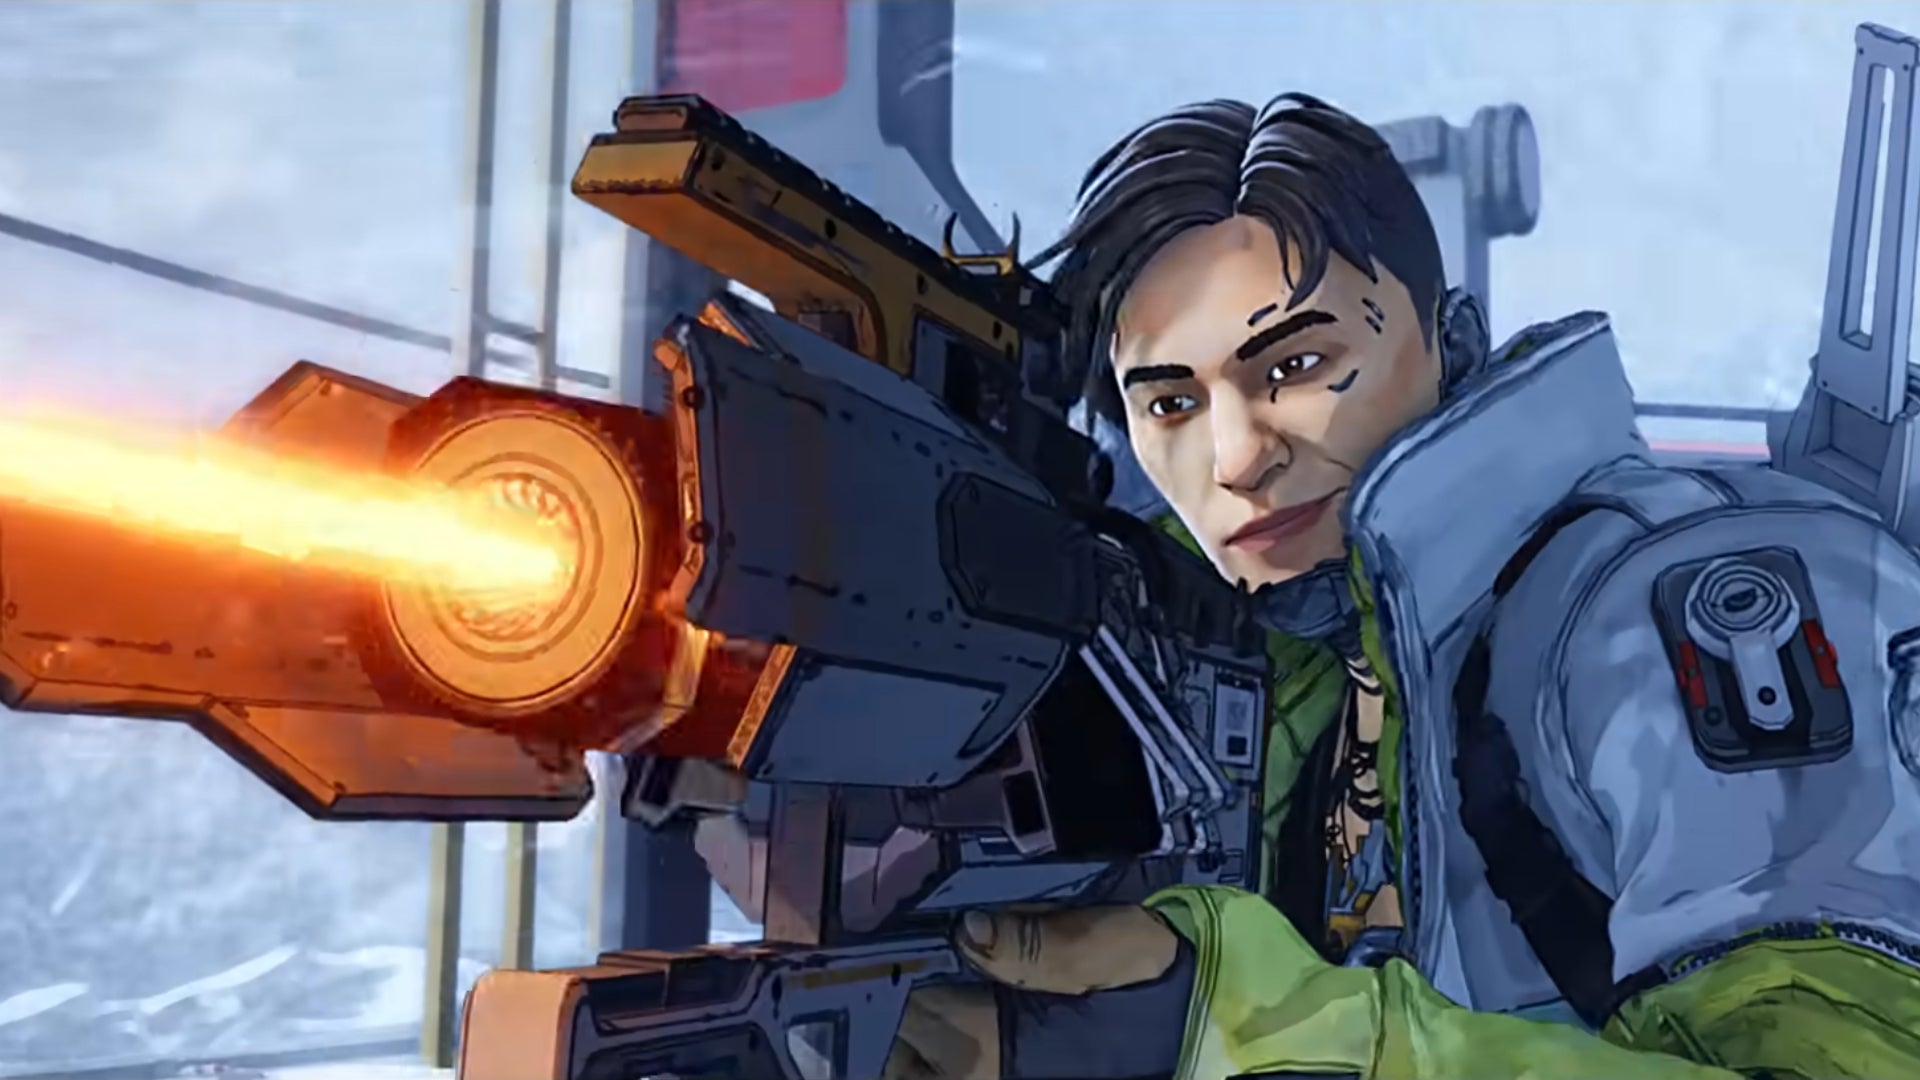 Crypto aims and fires a Charge Rifle in Apex Legends.